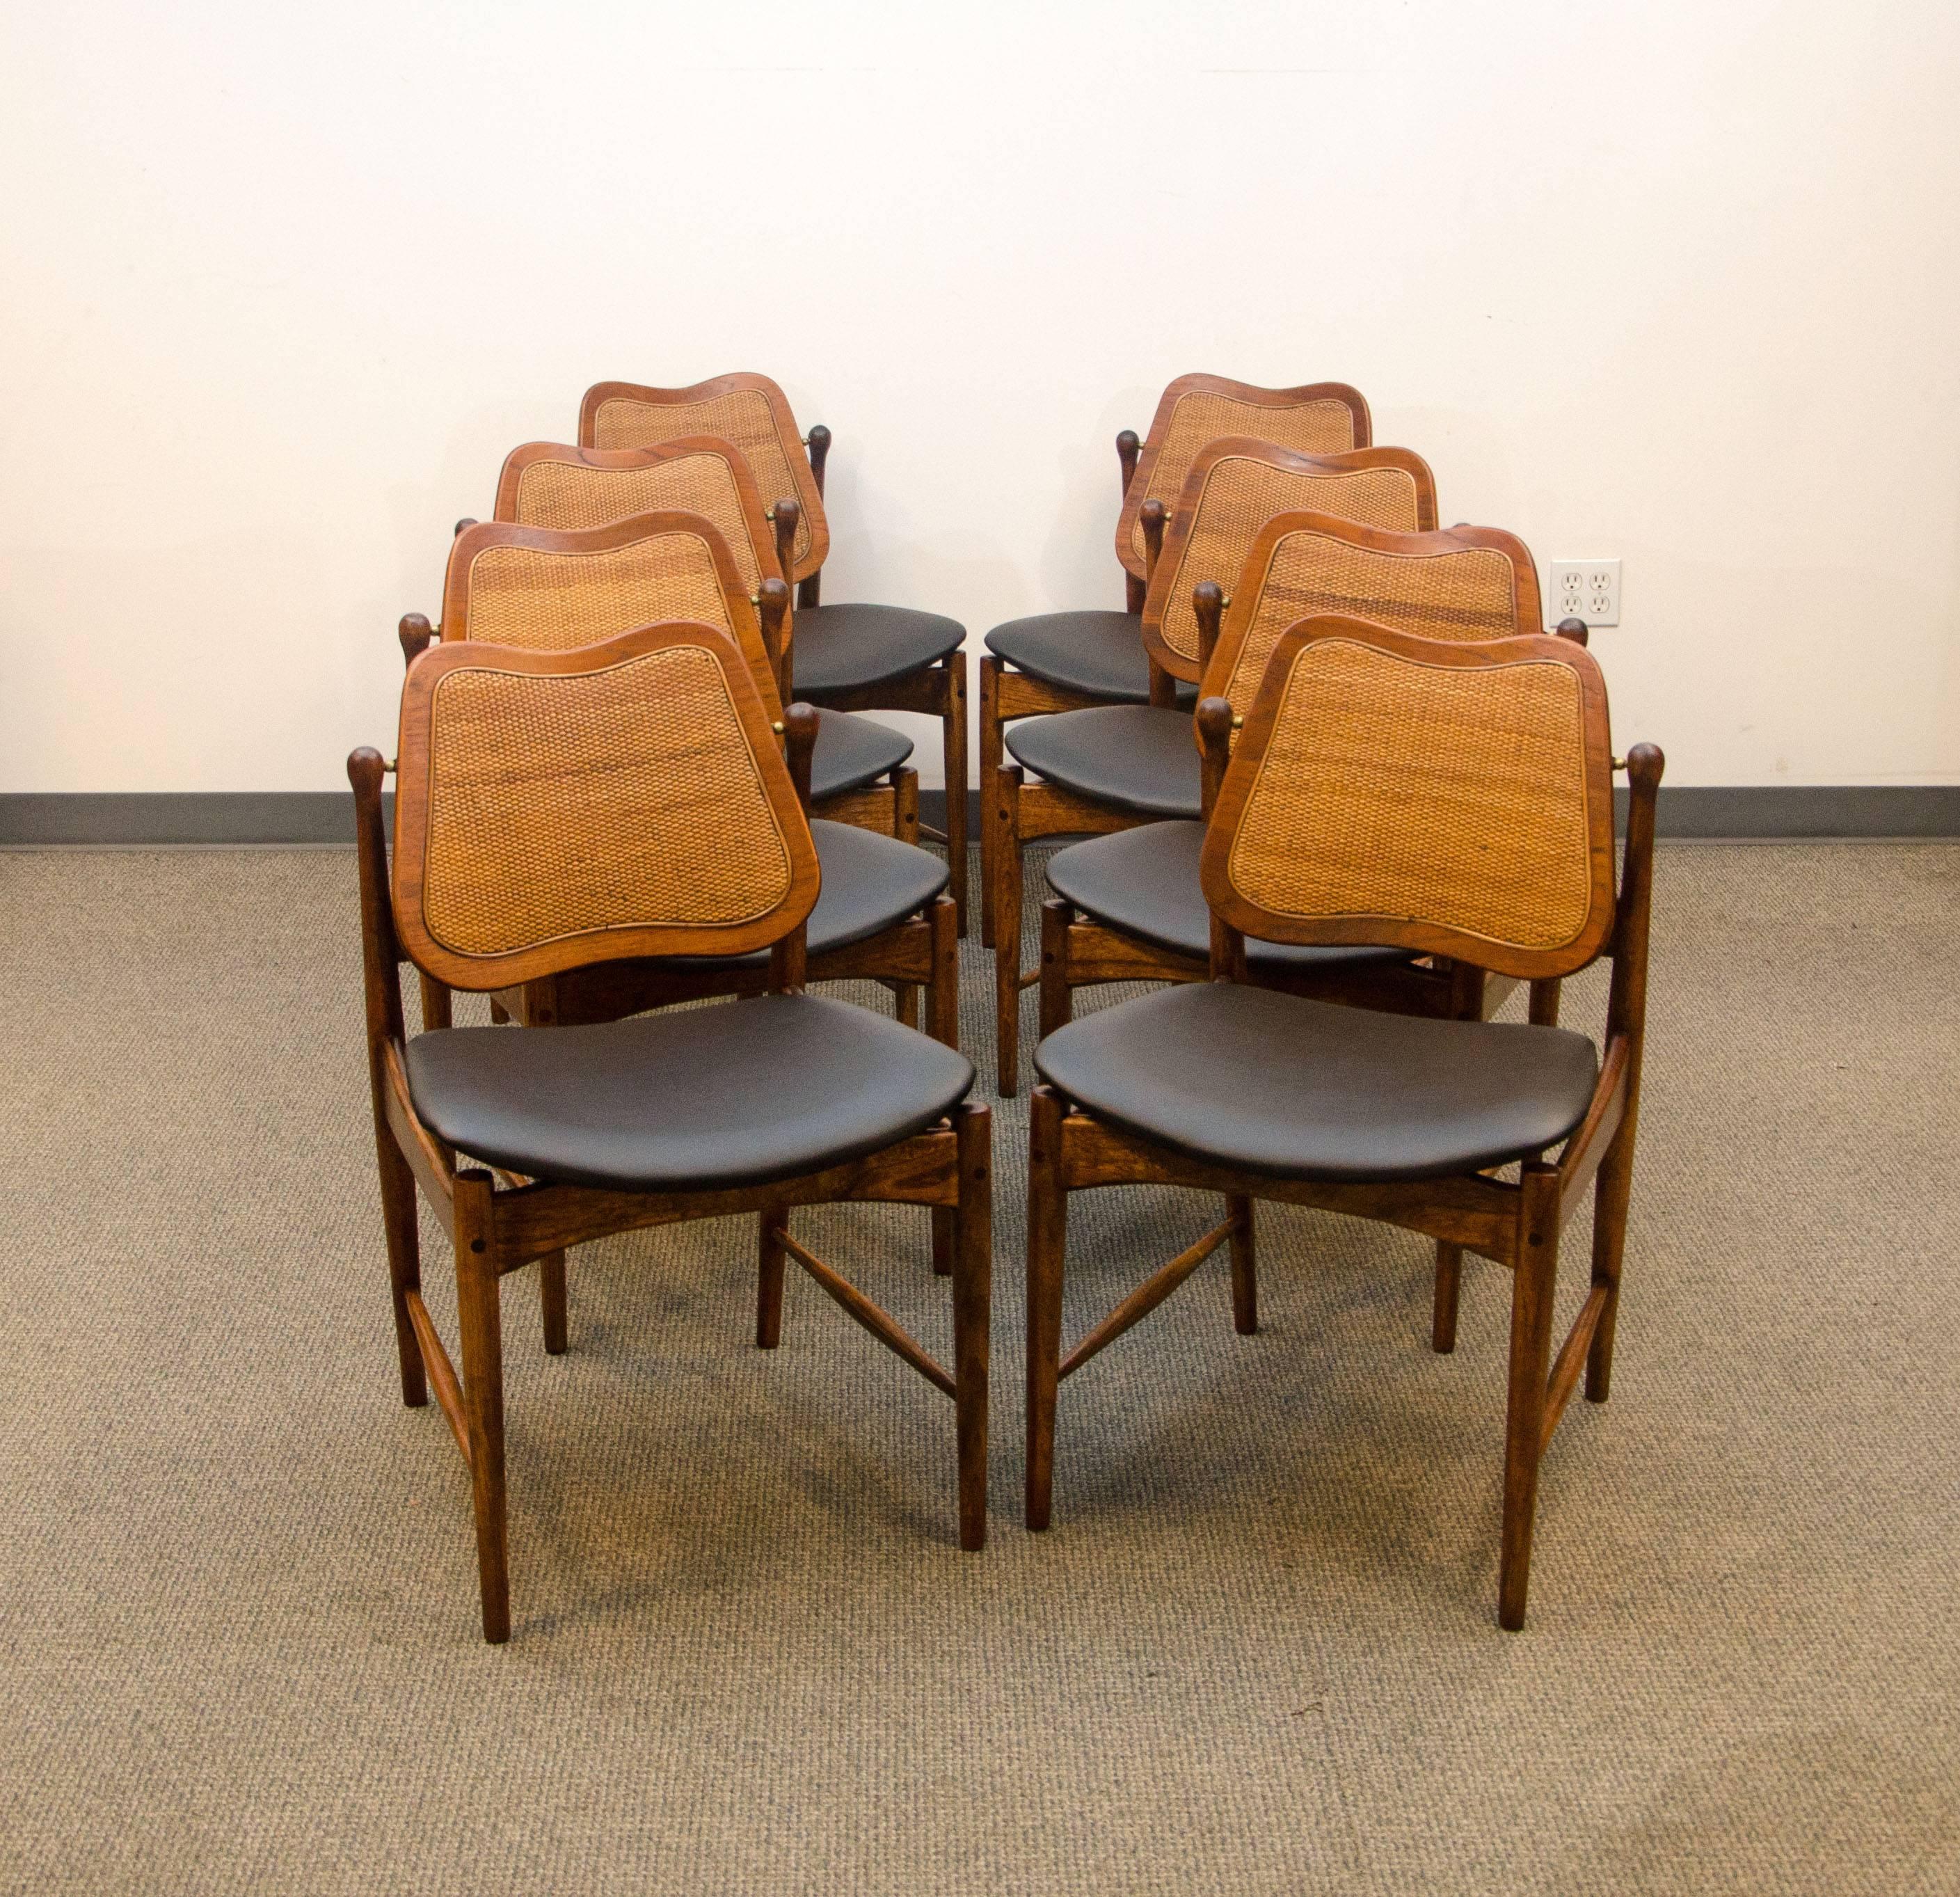 Rare set of eight Danish dining chairs. The teak backs swivel and have their original caned inserts. The seats have a floating design in the way they attach to the frame. The swivel backs have a wood crossbar behind them to keep them in place. There